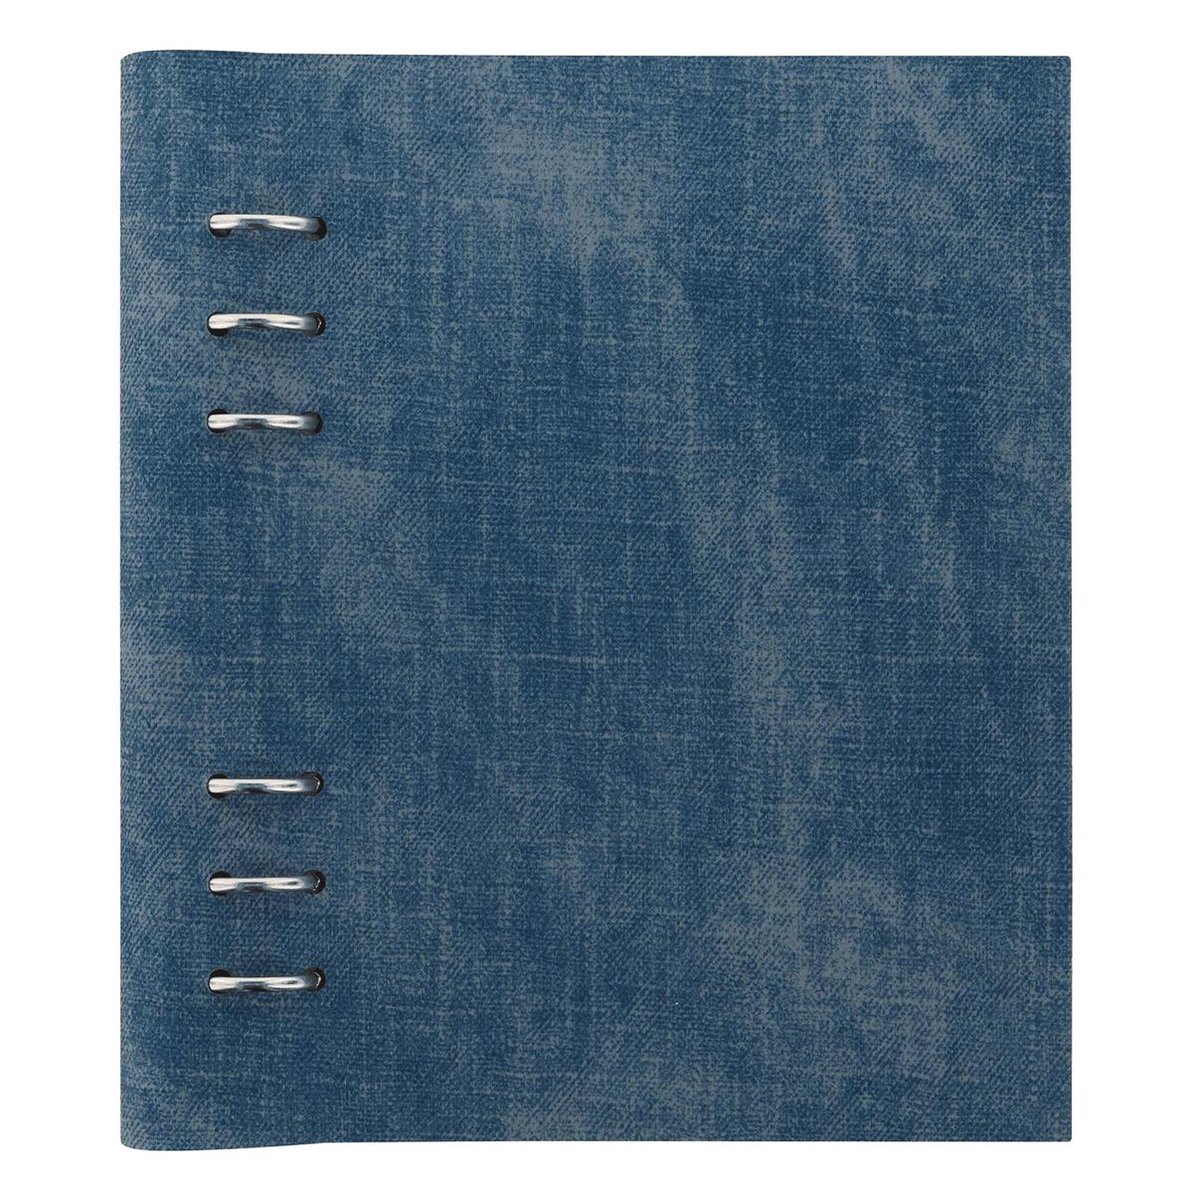 Filofax Clipbook A5 Classic – Denim Jeans + Extra 50 vel (100 pagina's) - Dotted - Wit - 116 g/m² Papier